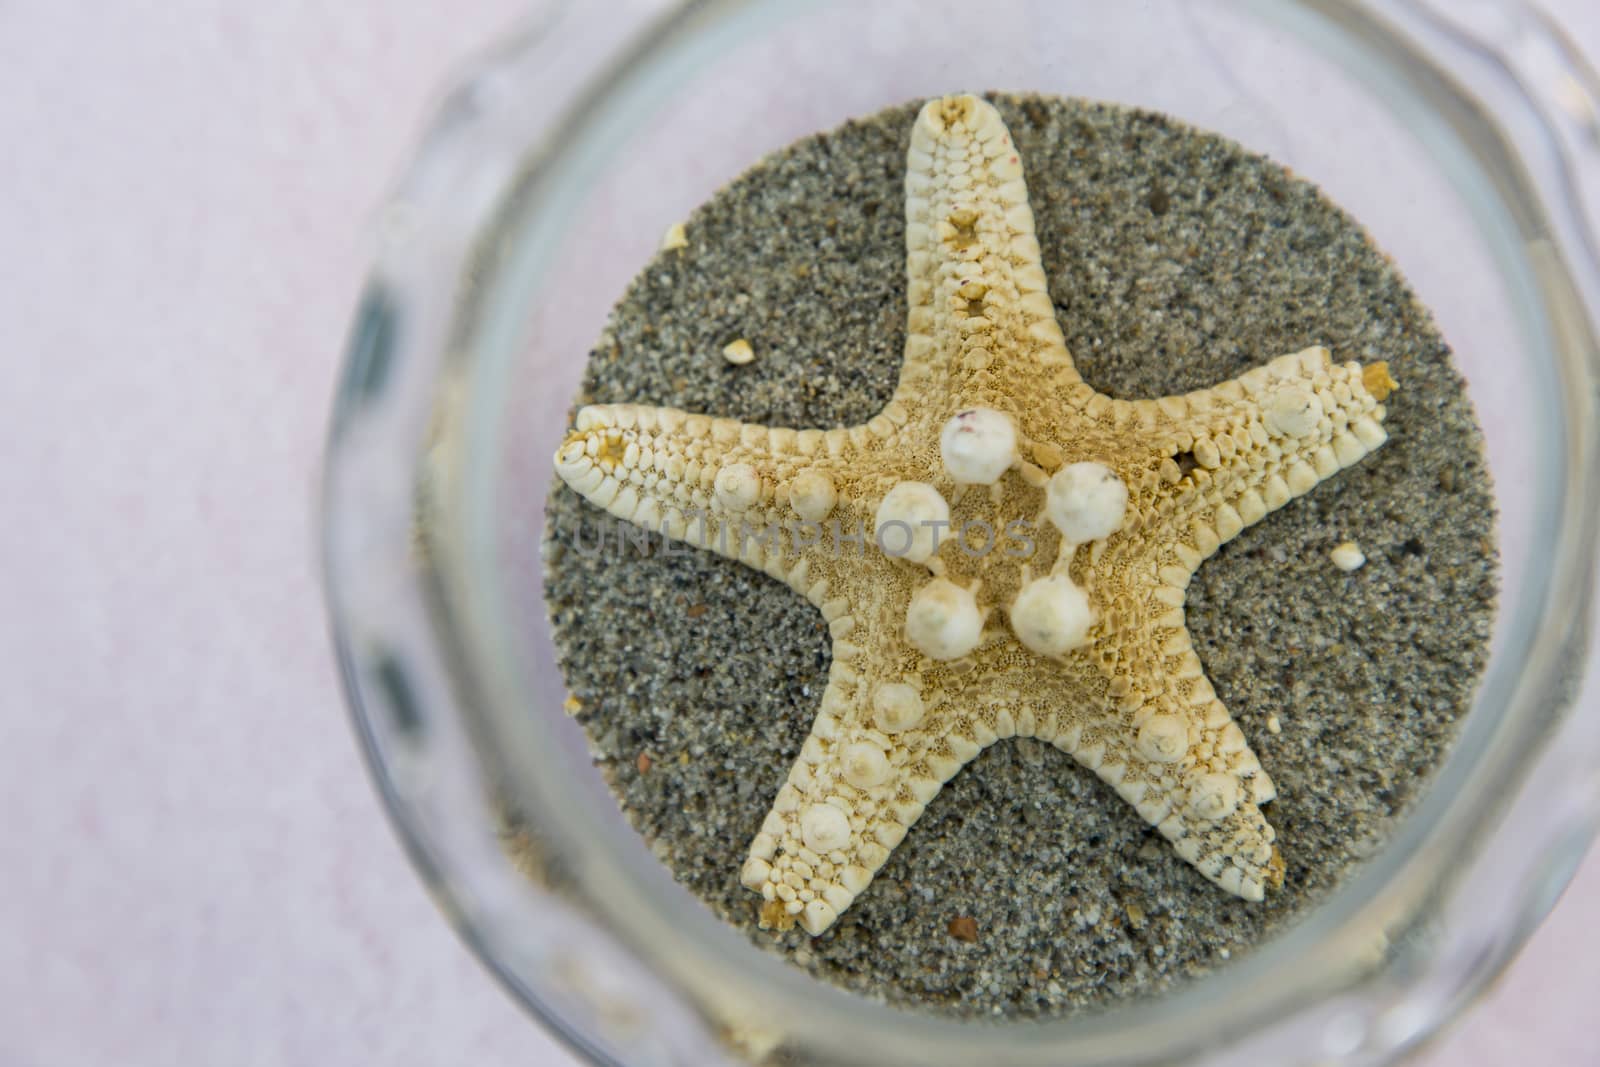 View of a starfish in a glass jar that is used as centreboard